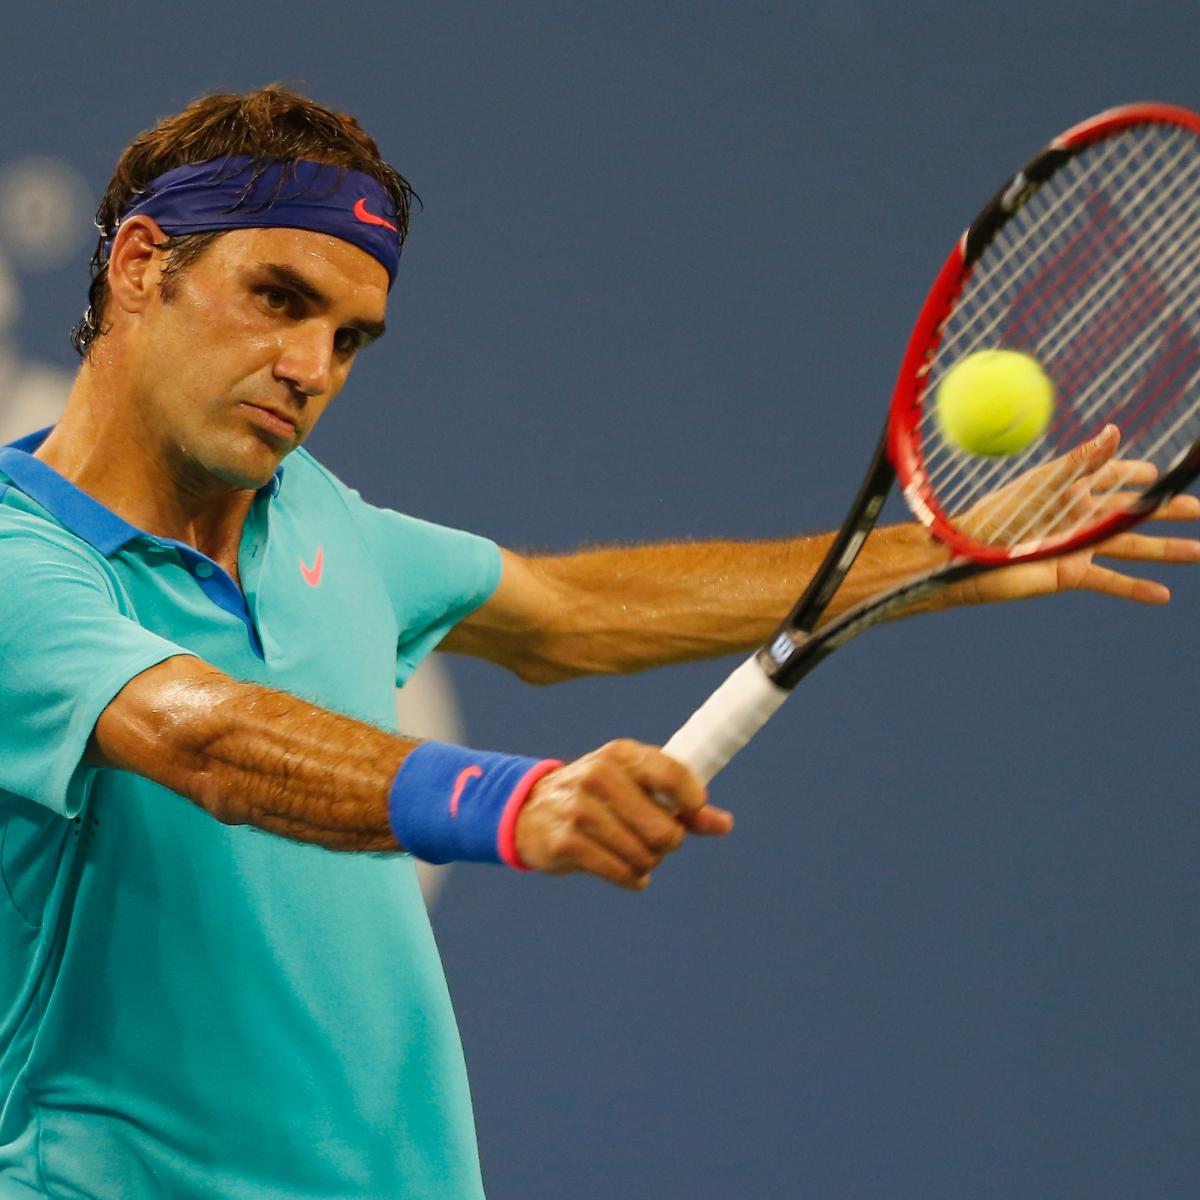 US Open Tennis 2014 Schedule: TV Coverage and Live Stream Info for Day